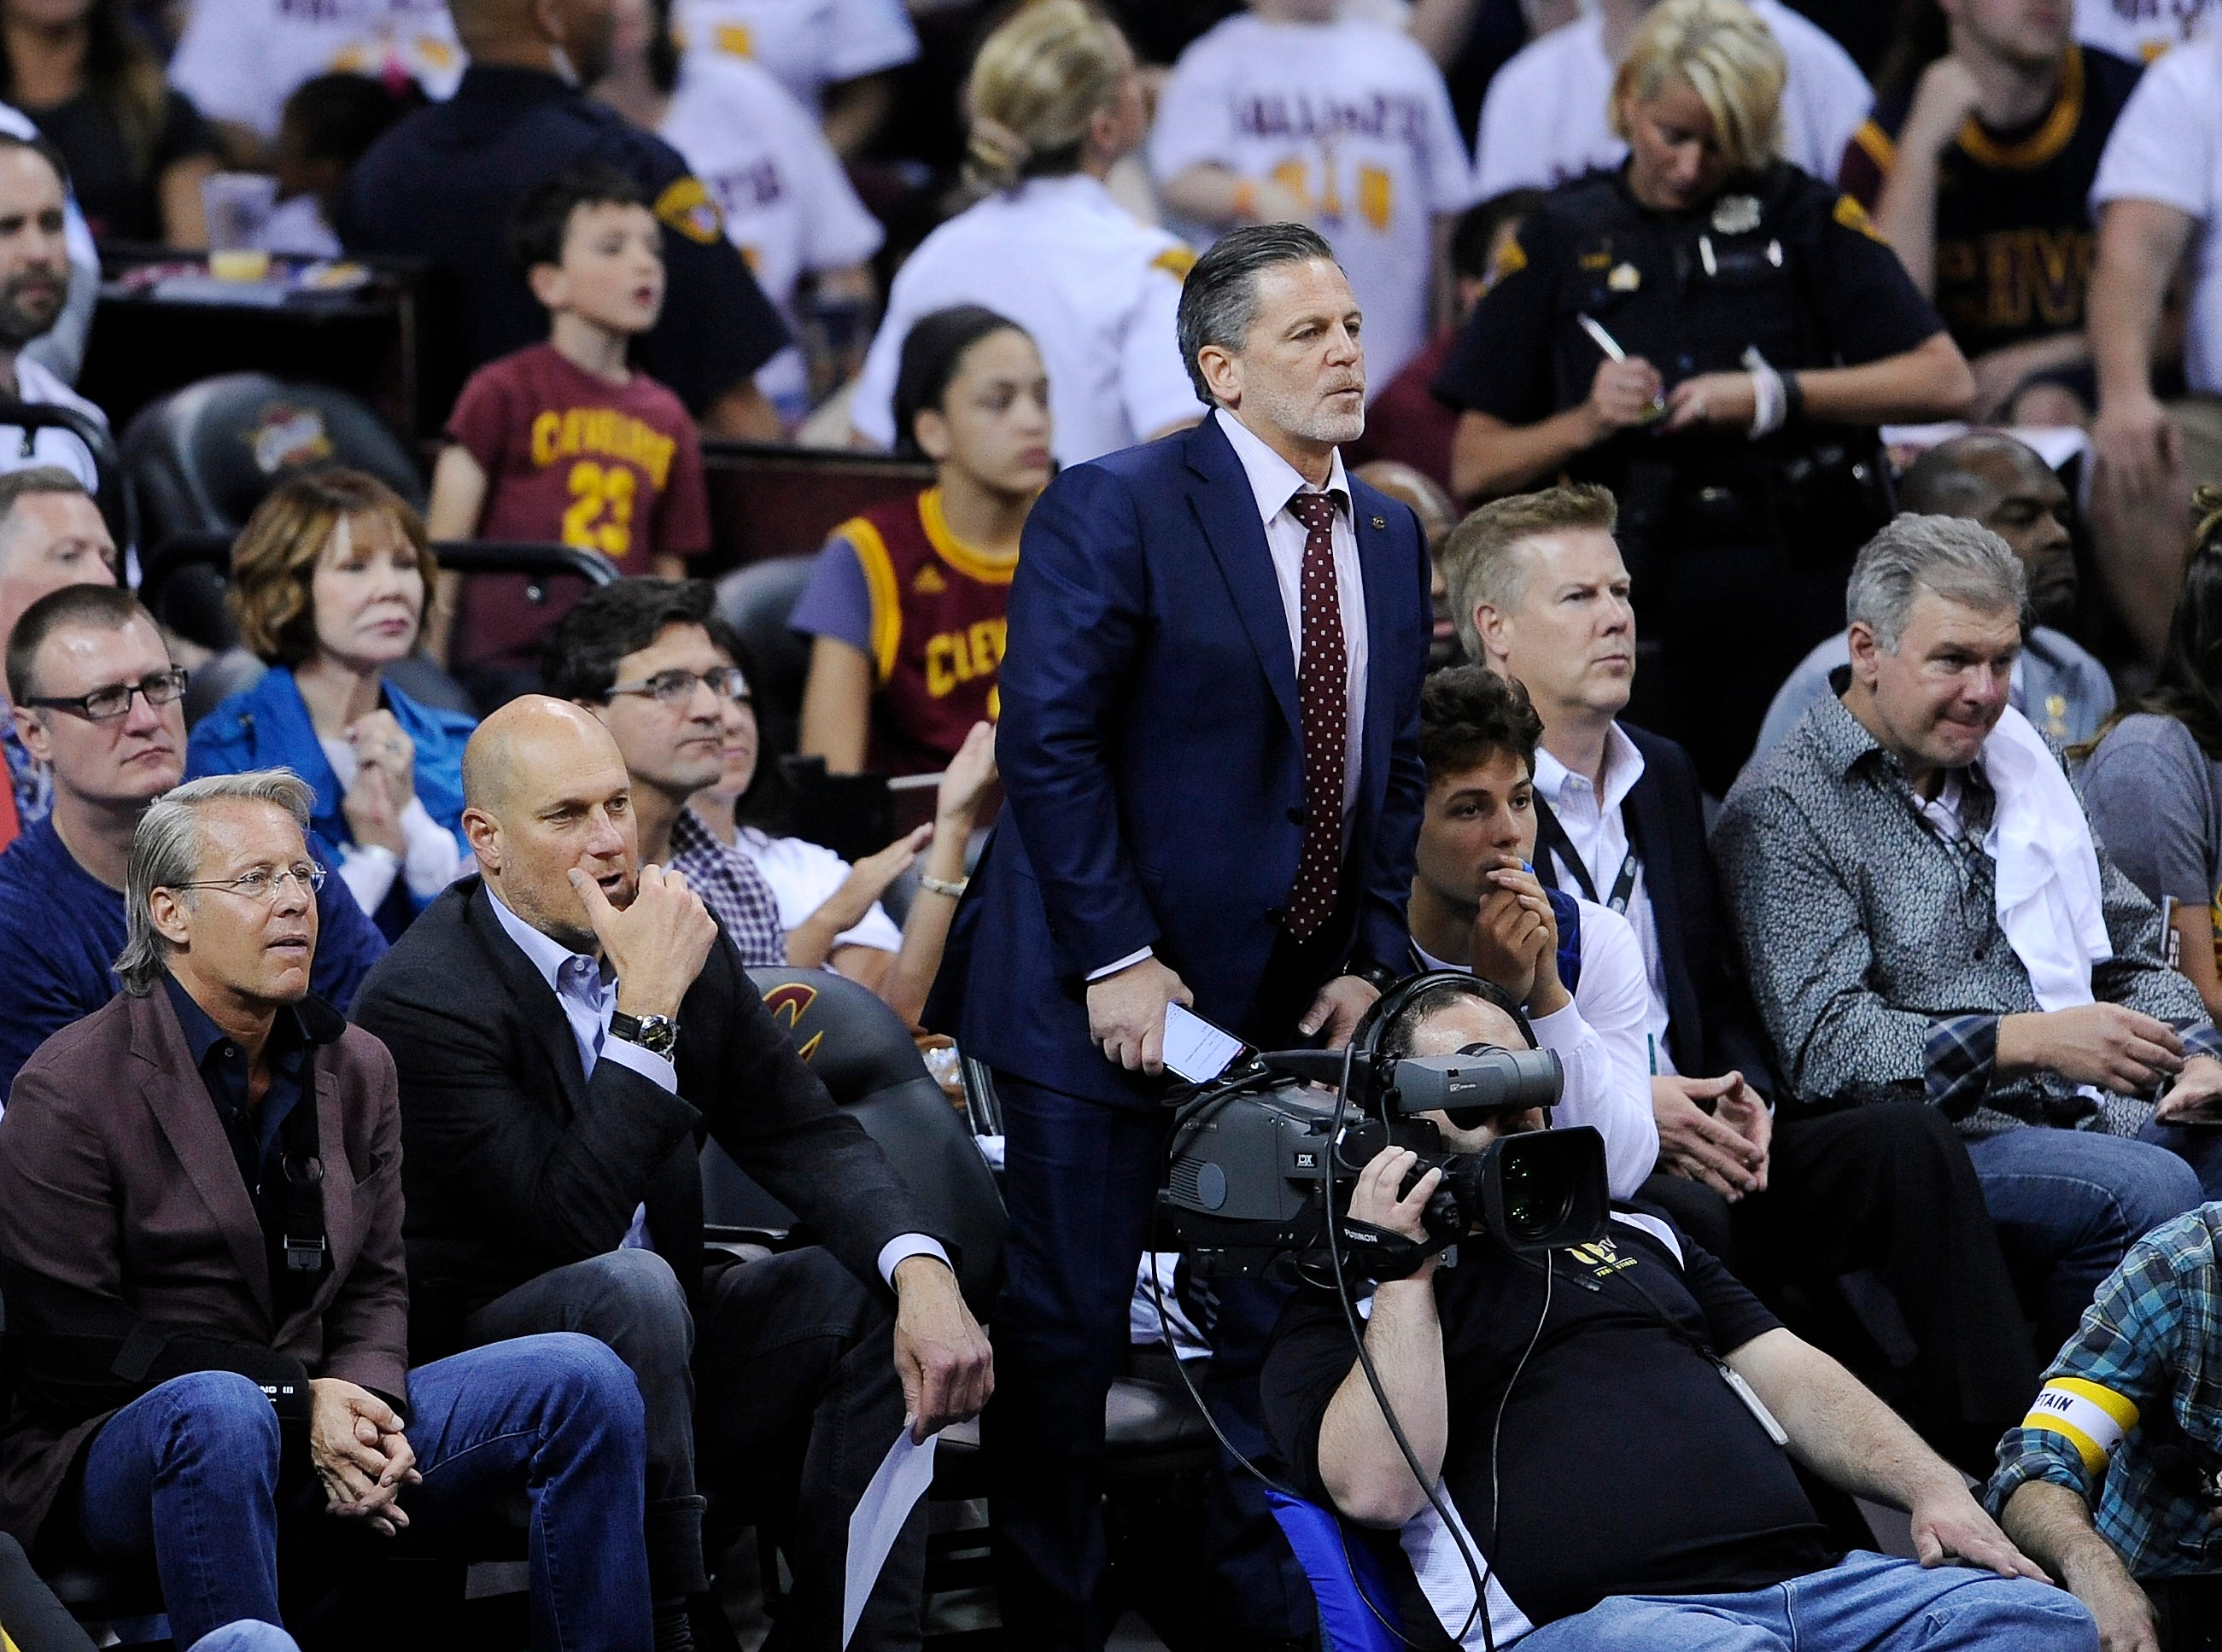 Cleveland Cavaliers owner Dan Gilbert stands to watch his team during a game between the Detroit Pistons and the Cleveland Cavaliers during the first round of the NBA playoffs at Quicken Loan Arena, in Cleveland, Ohio. April,20, 2016.